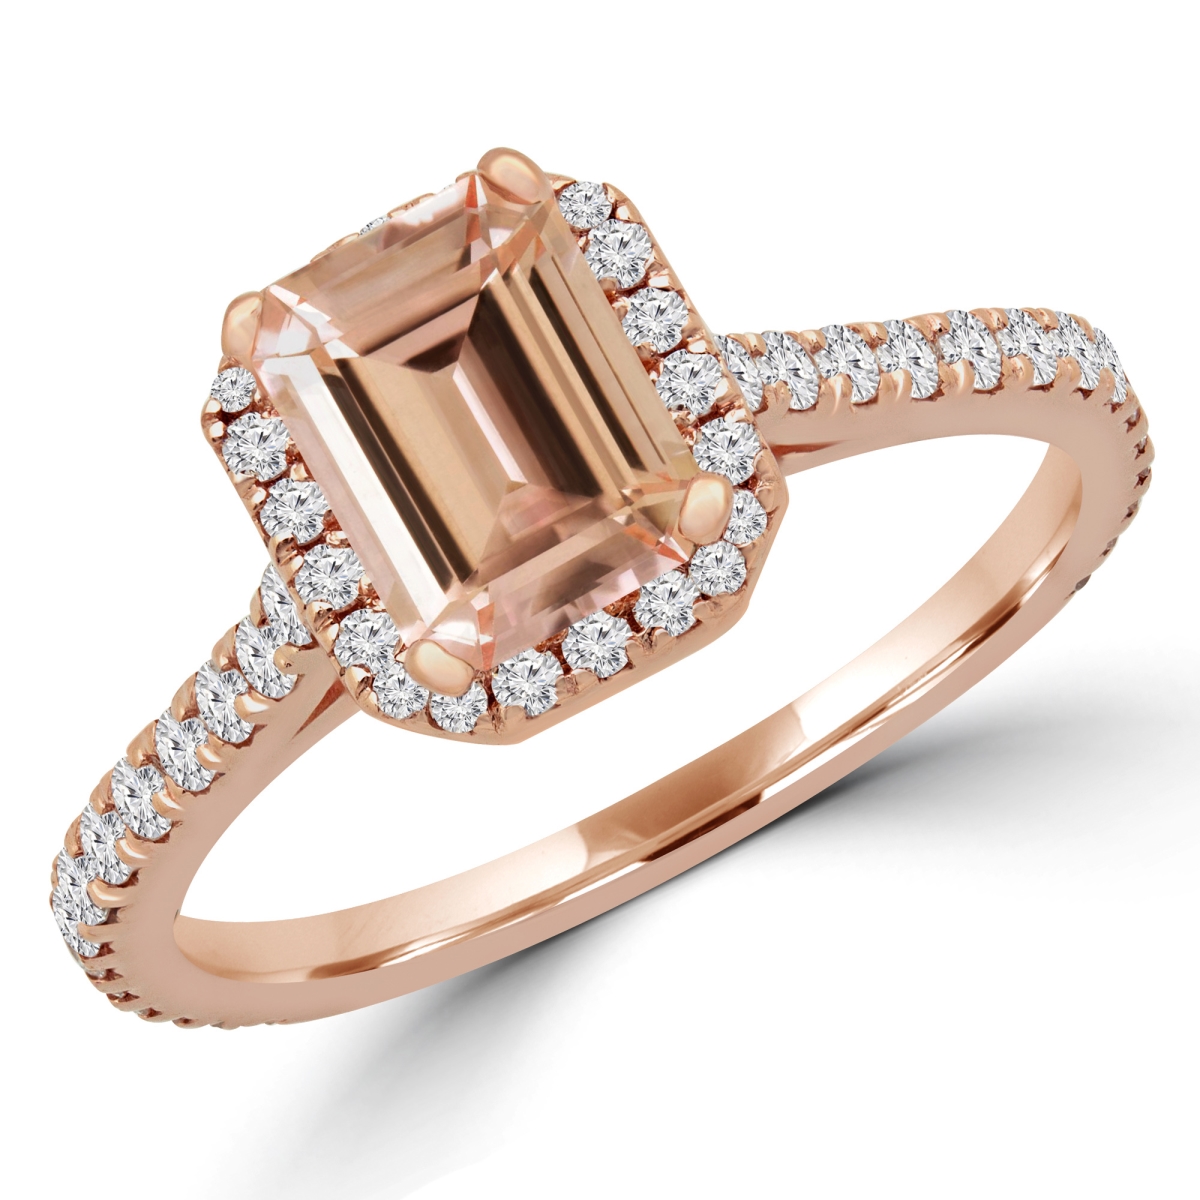 Picture of Majesty Diamonds MD180580-3.75 1.25 CTW Emerald Pink Morganite Halo Engagement Ring in 14K Rose Gold - Size 3.75